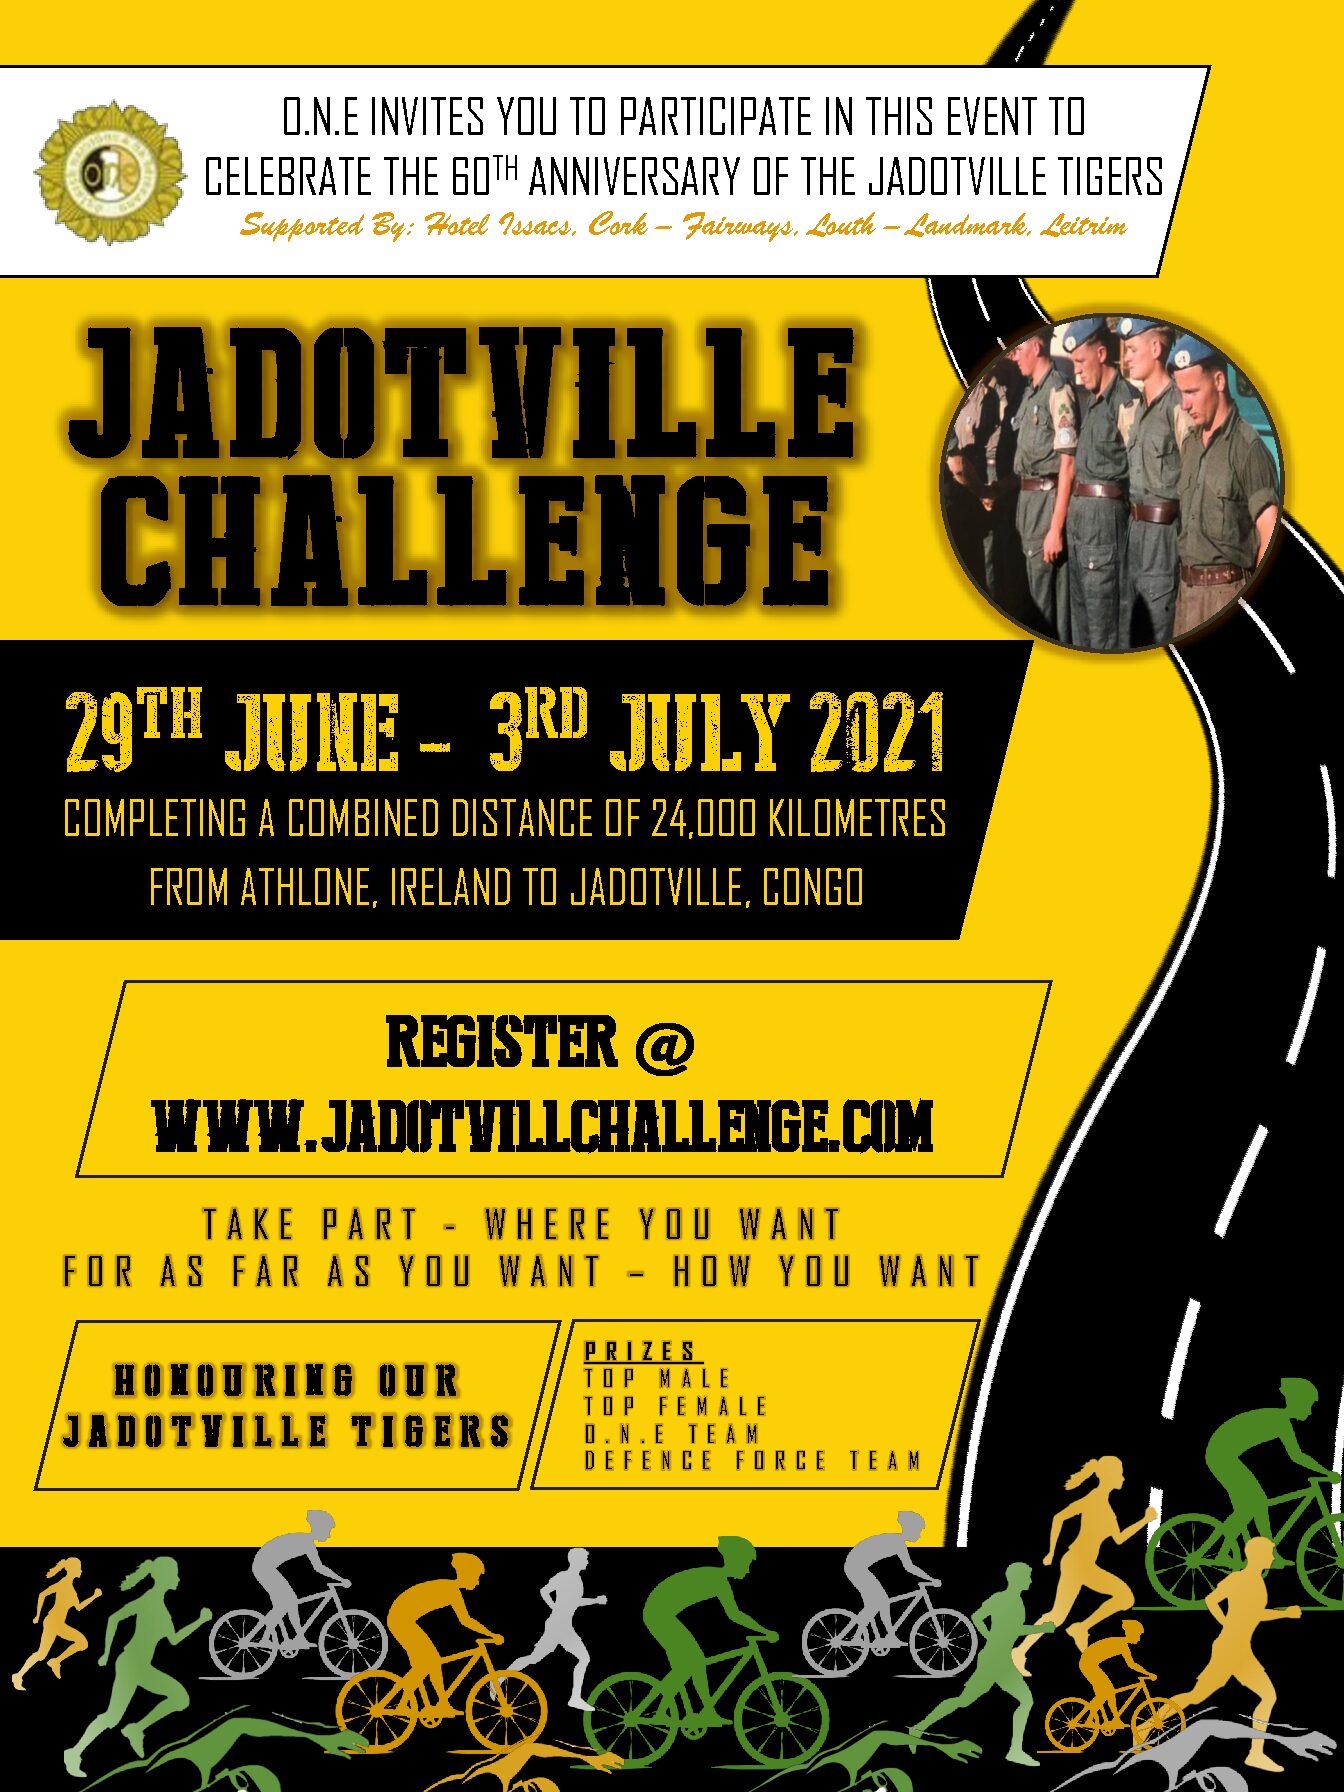 JADOTVILLE CHALLENGE 29th June to the 3rd July 2021